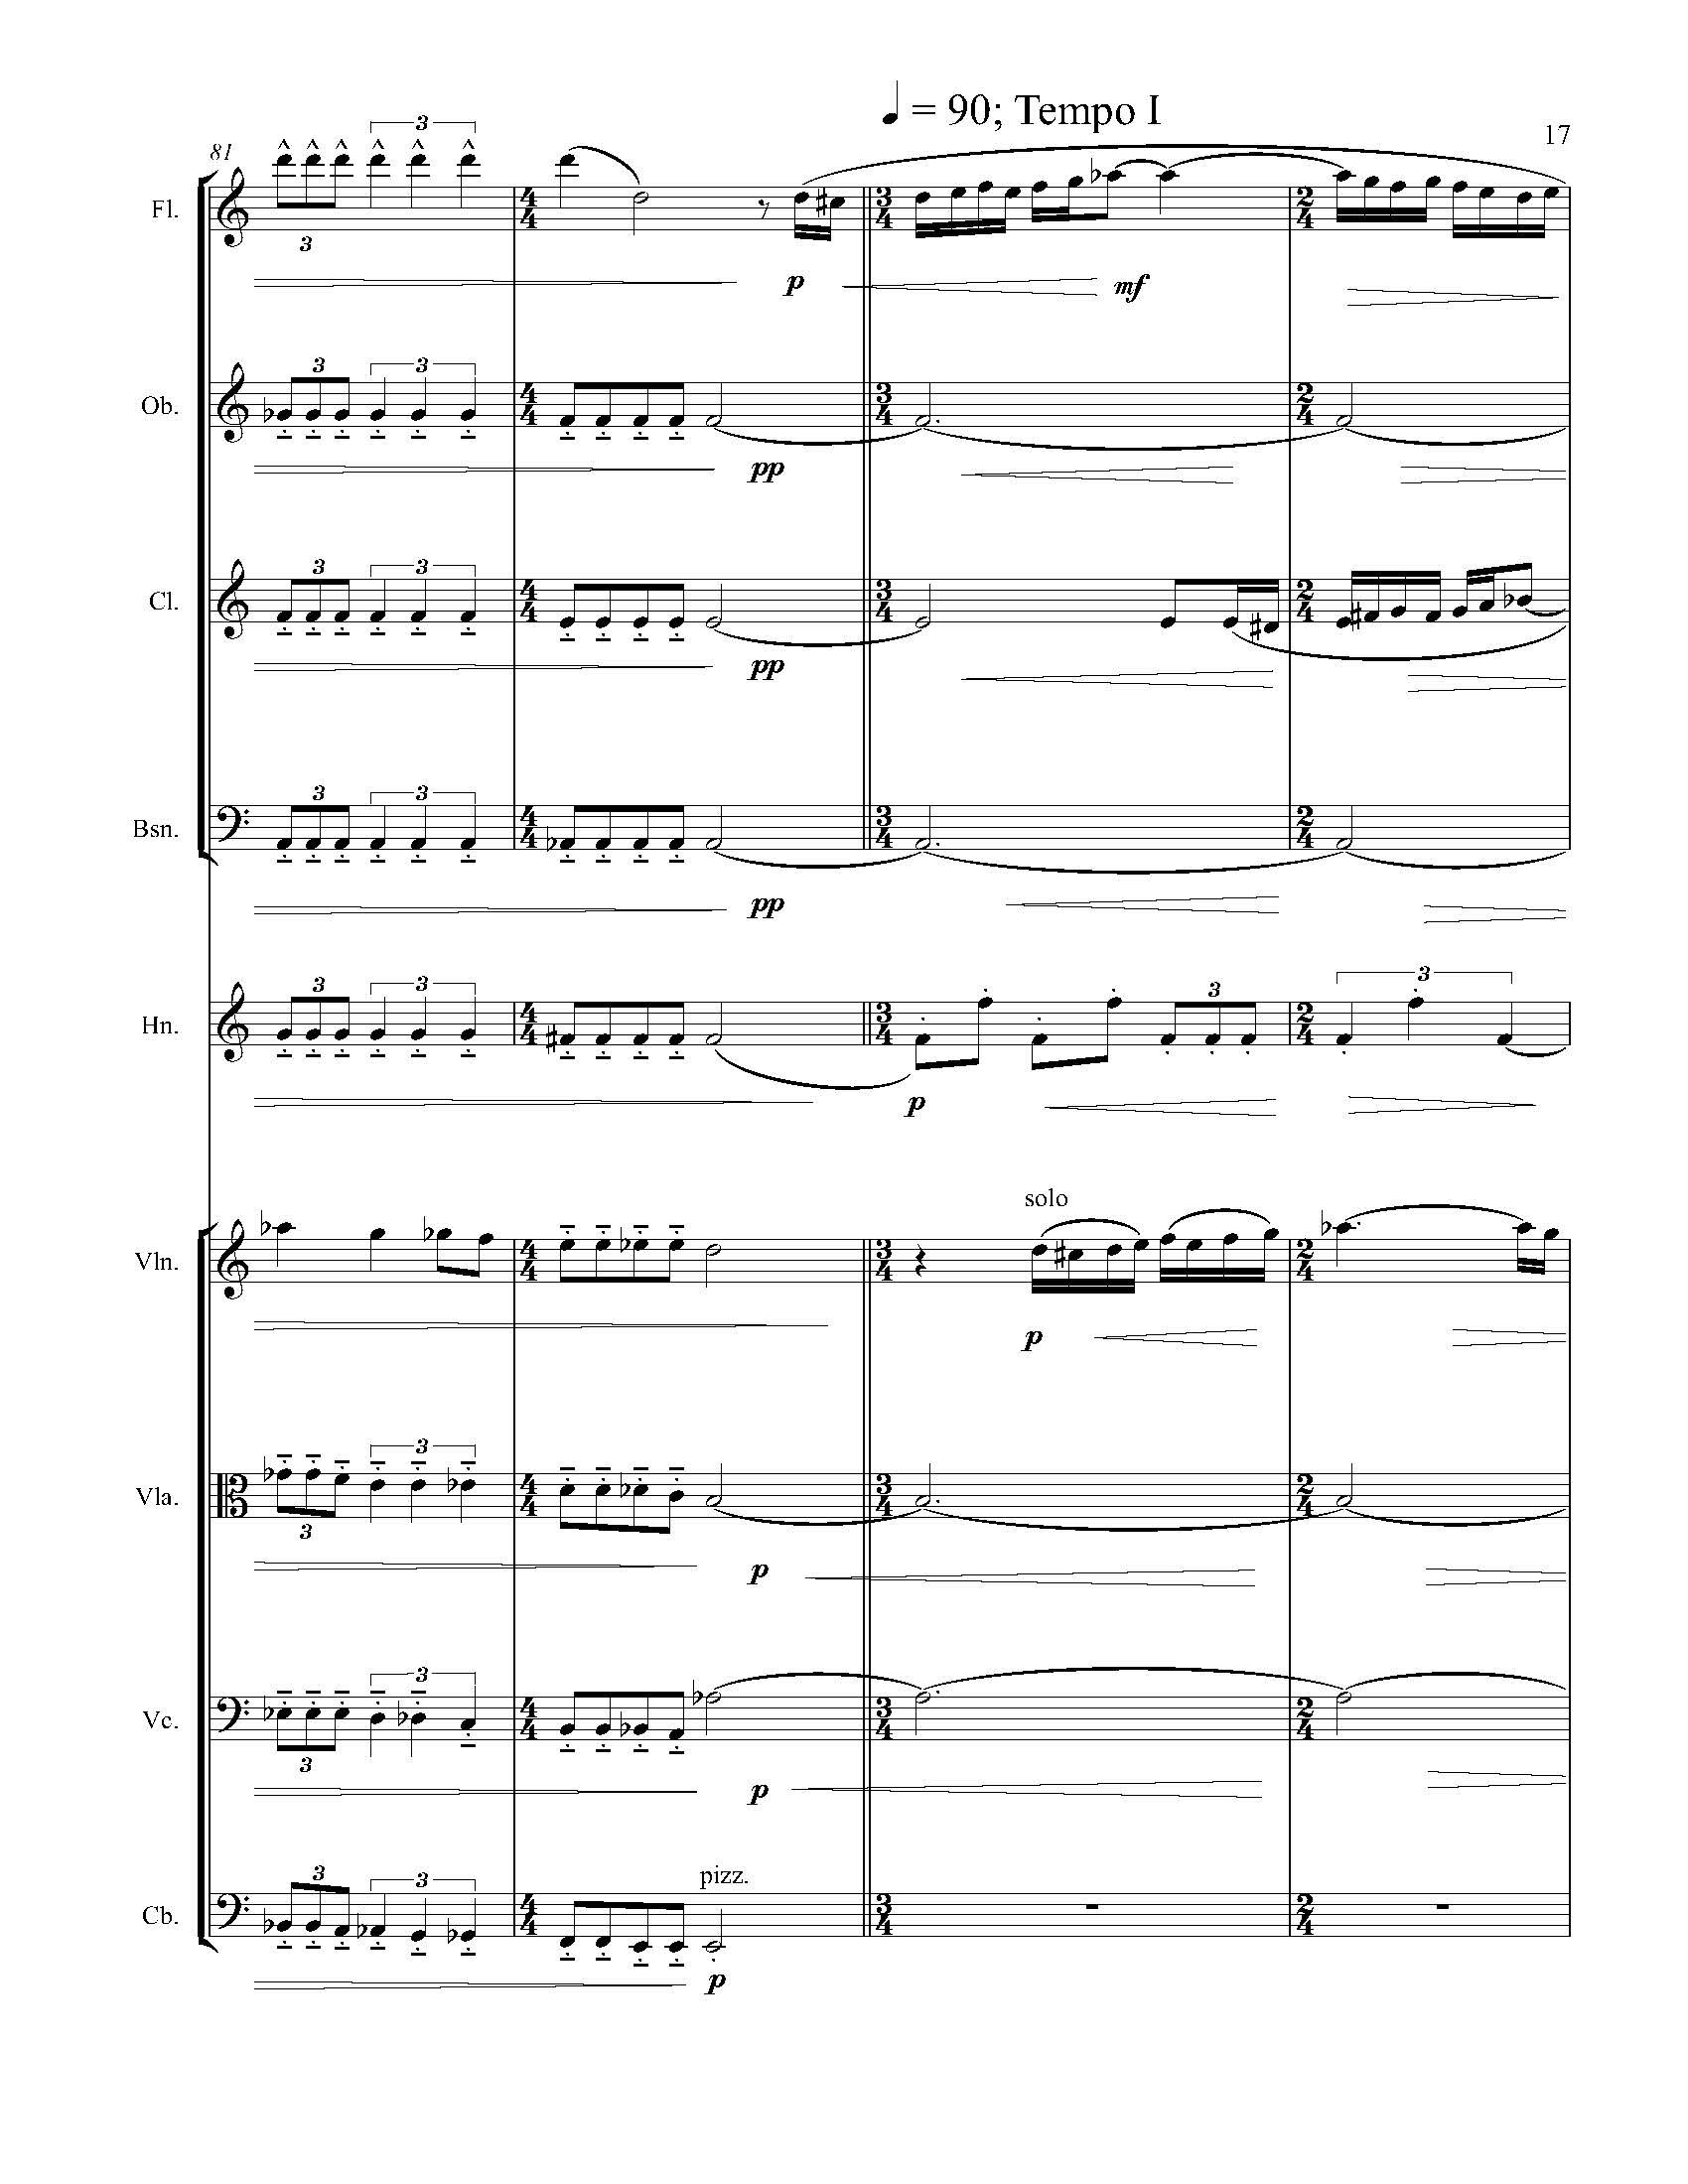 In Search of a Bird - Complete Score_Page_23.jpg